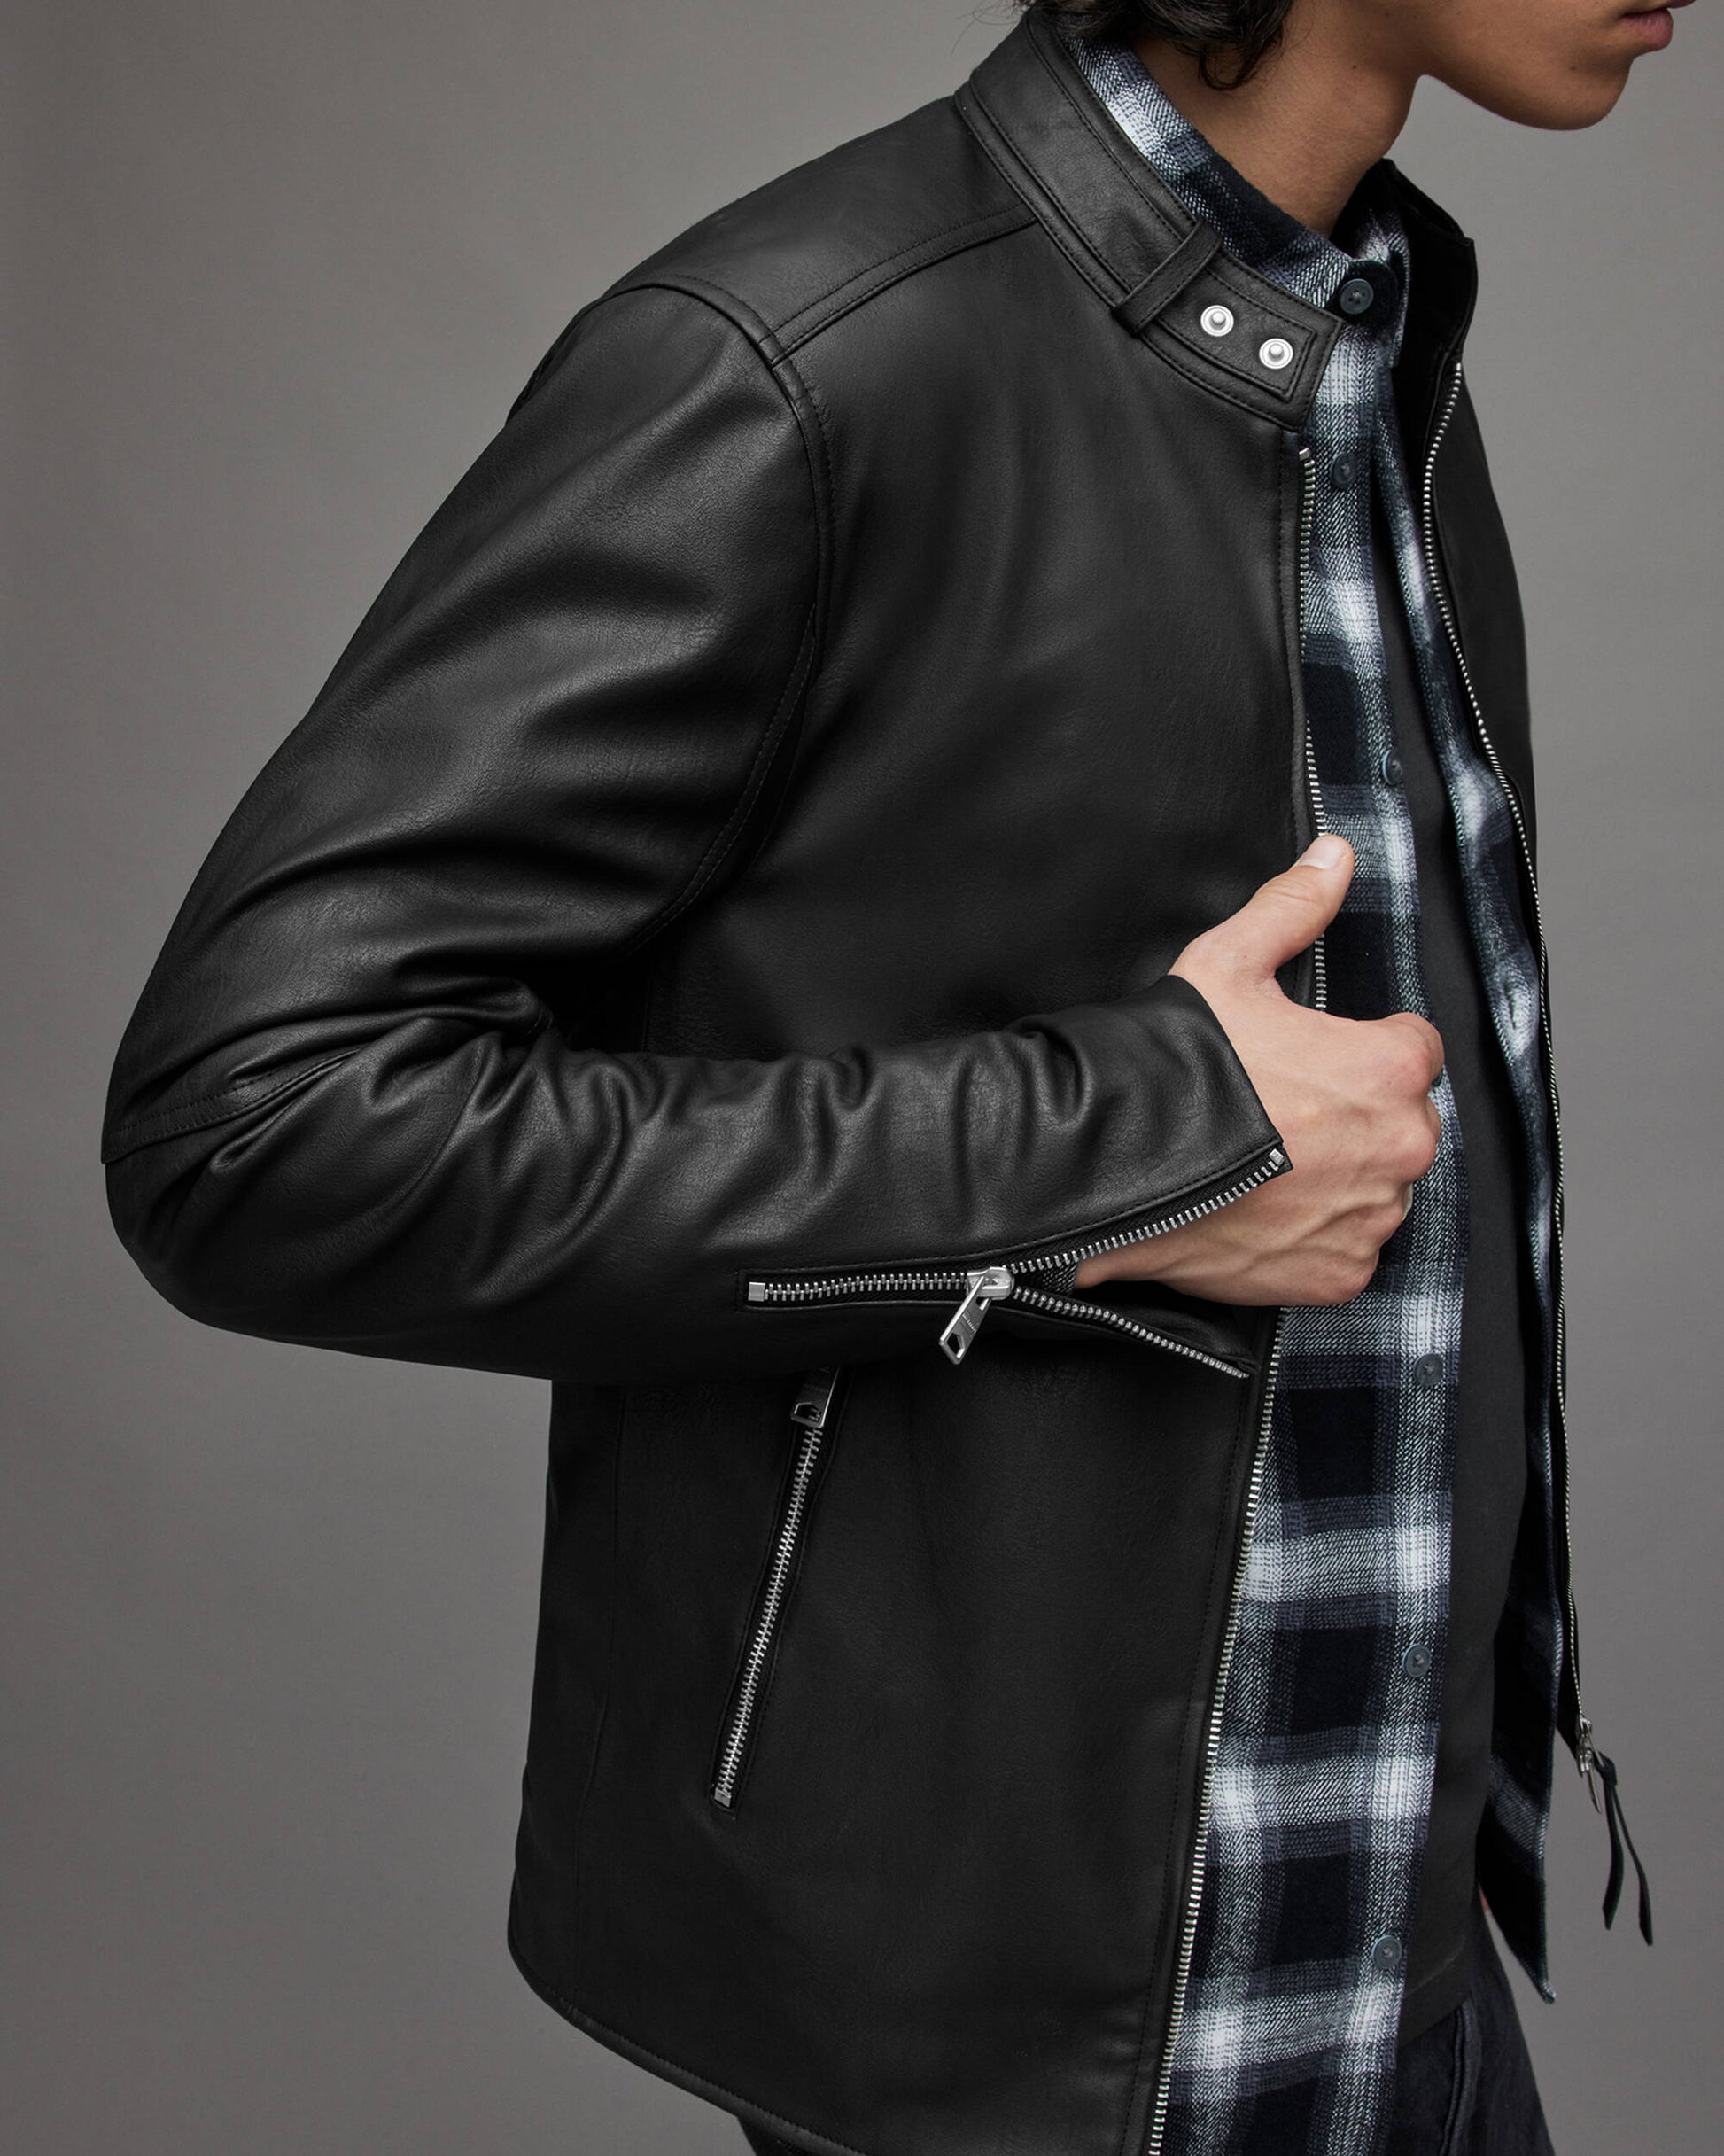 Men's Leather Harrington Jacket In Black With Band Collar